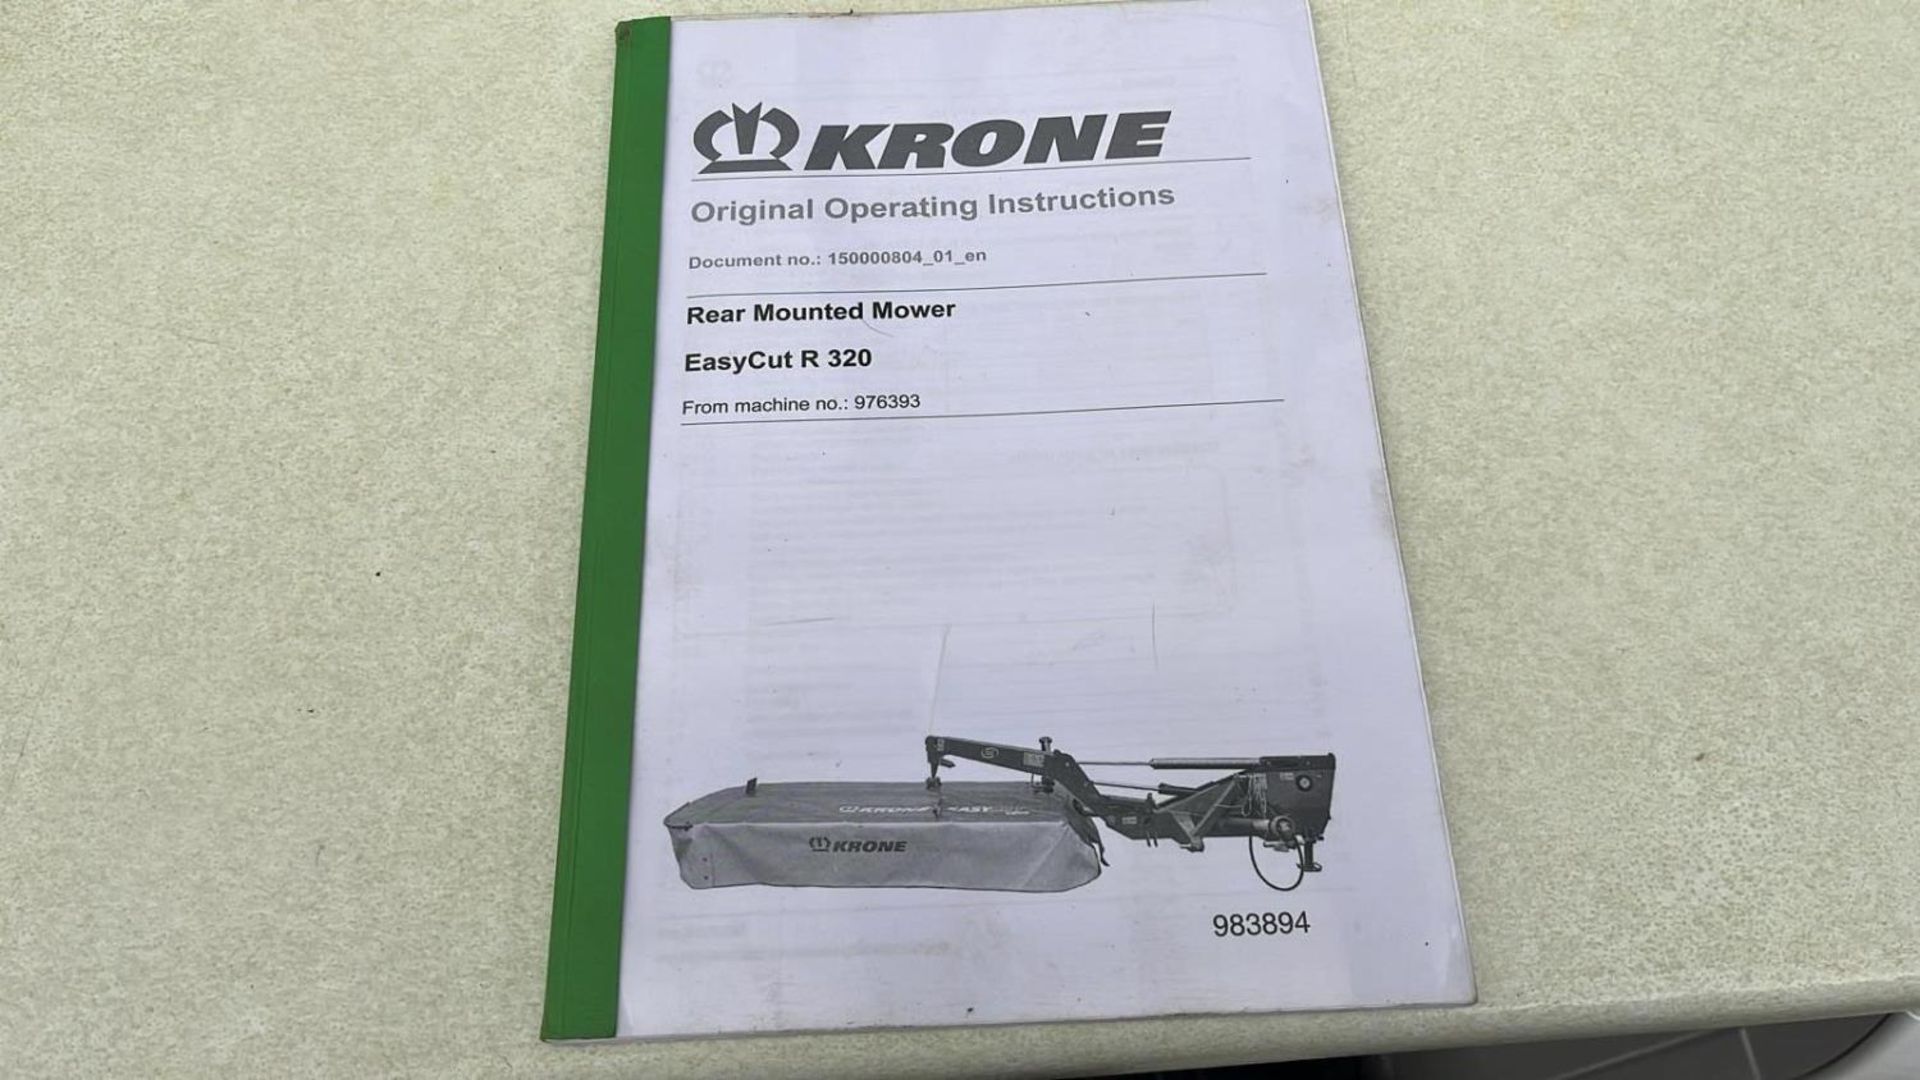 2018 KRONE EASY CUT R320 REAR MOUNTED MOWER WITH OPERATING MANUAL + VAT - Image 21 of 23